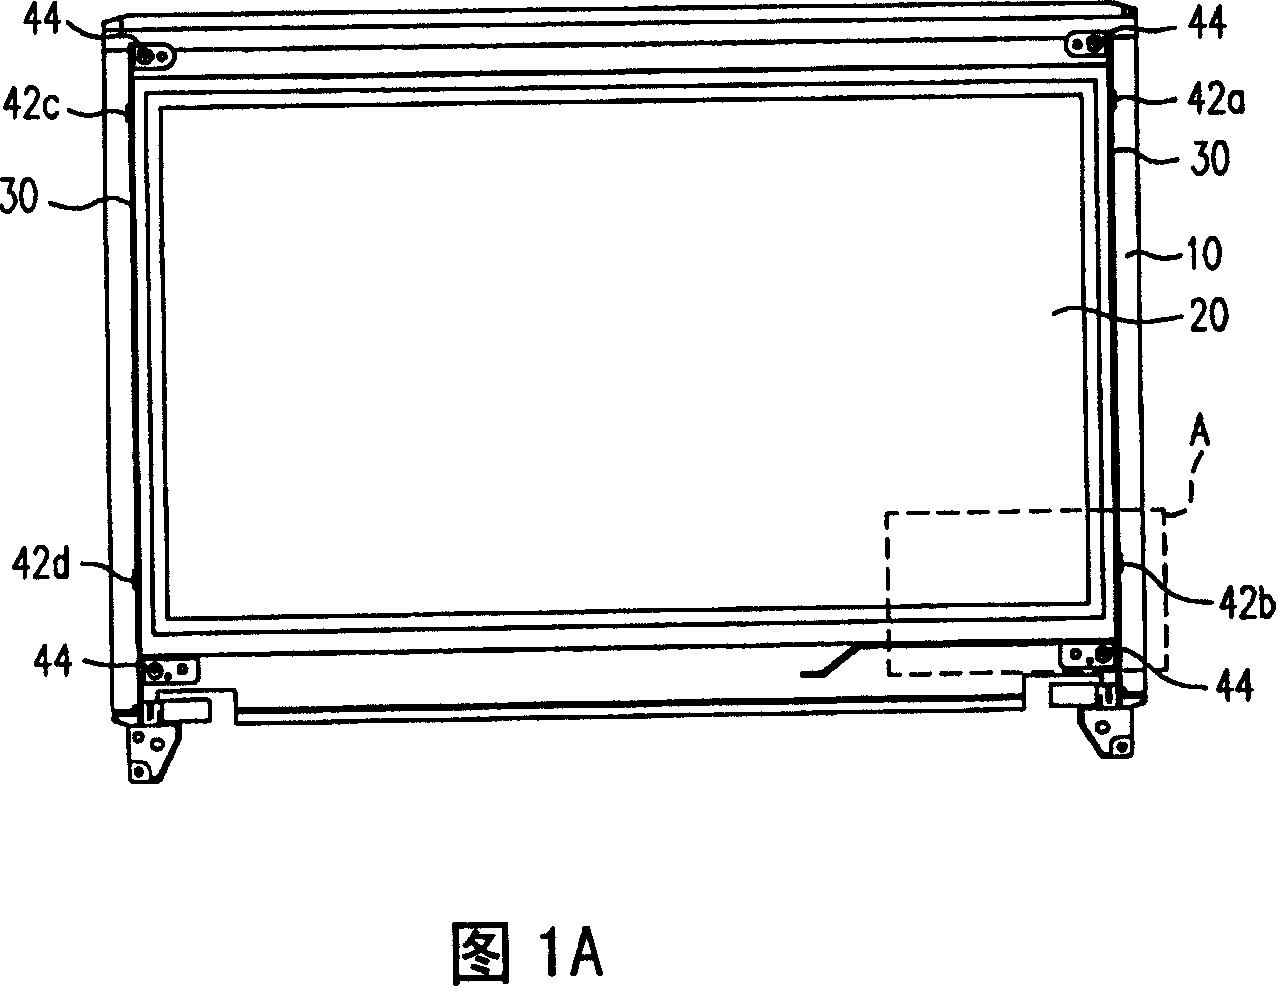 Structure for assembling faceplate